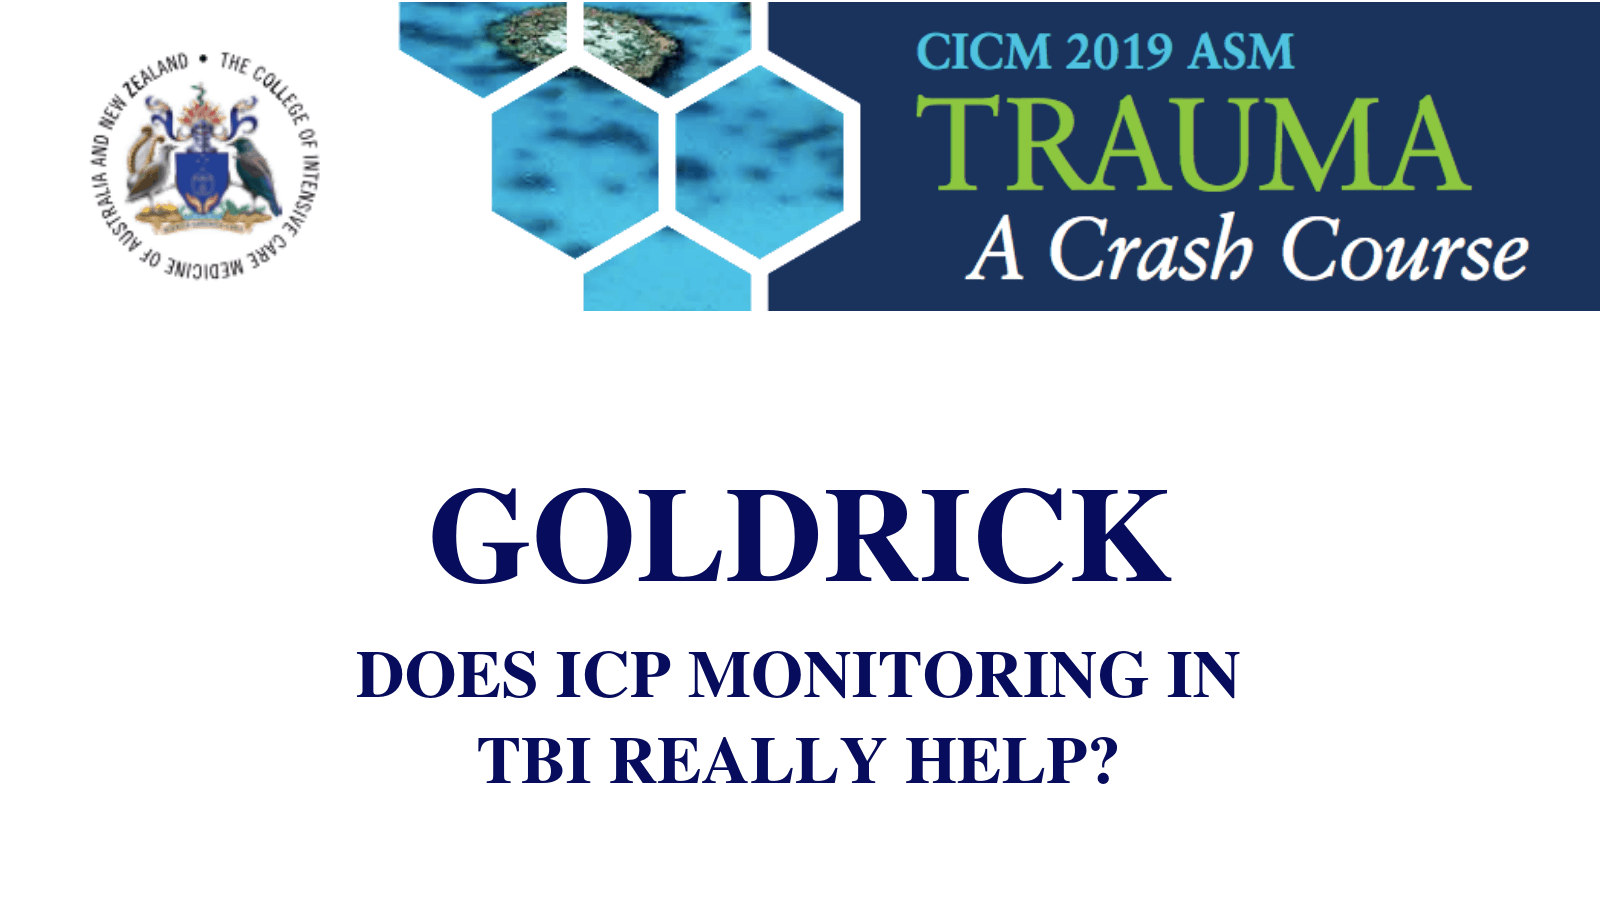 Does ICP monitoring in TBI really help